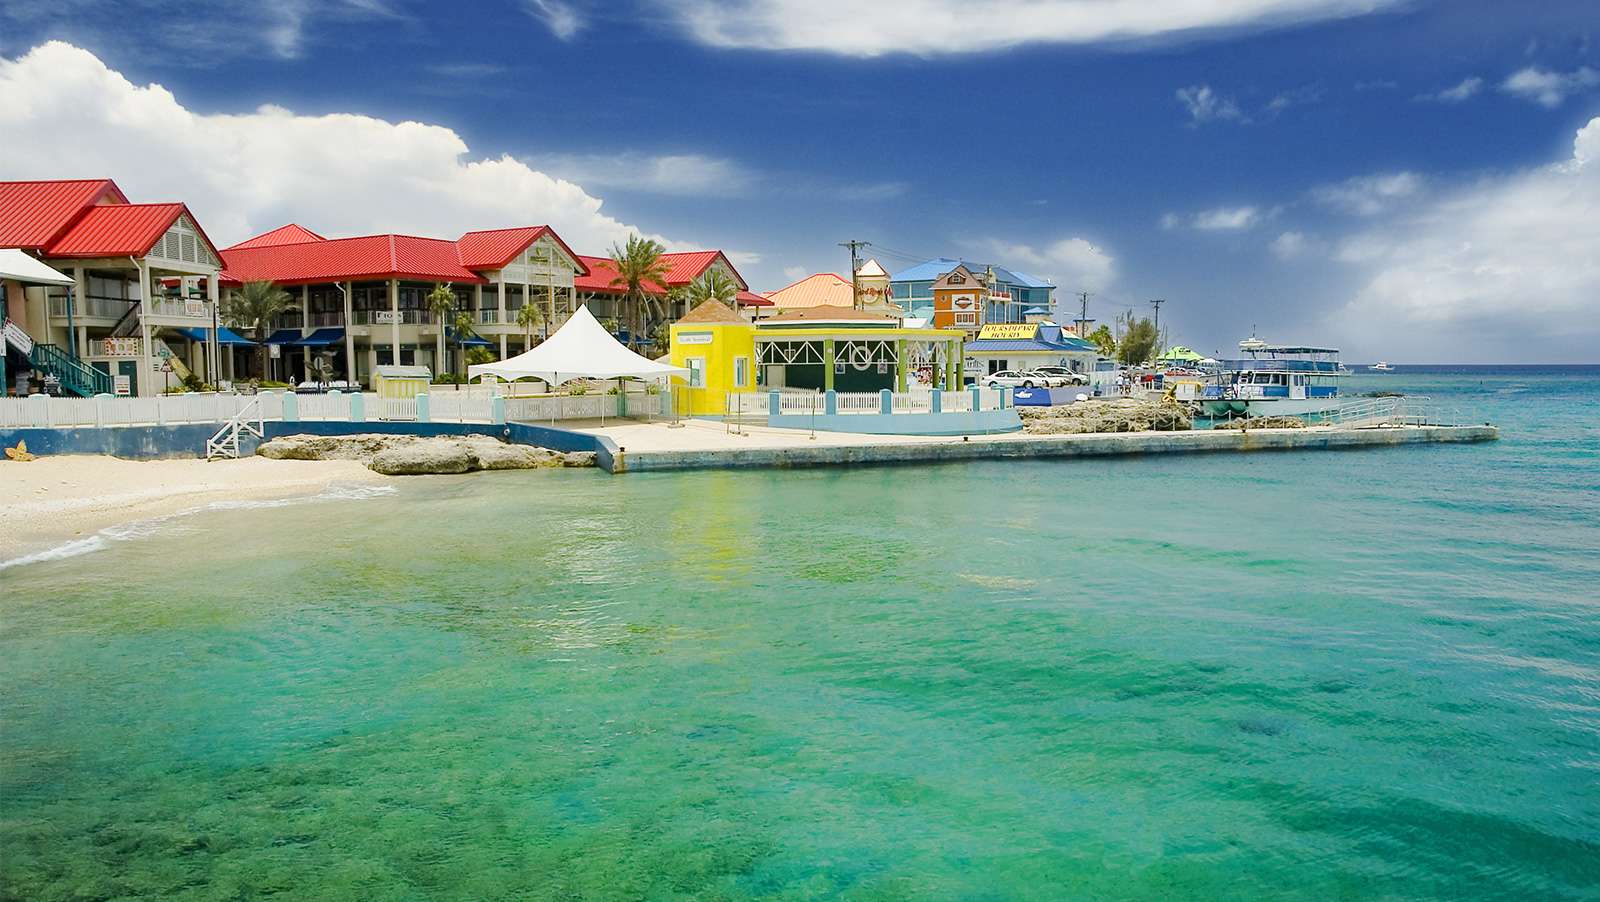 Why the Cayman Islands move on illegal gambling doesn't address the real issue